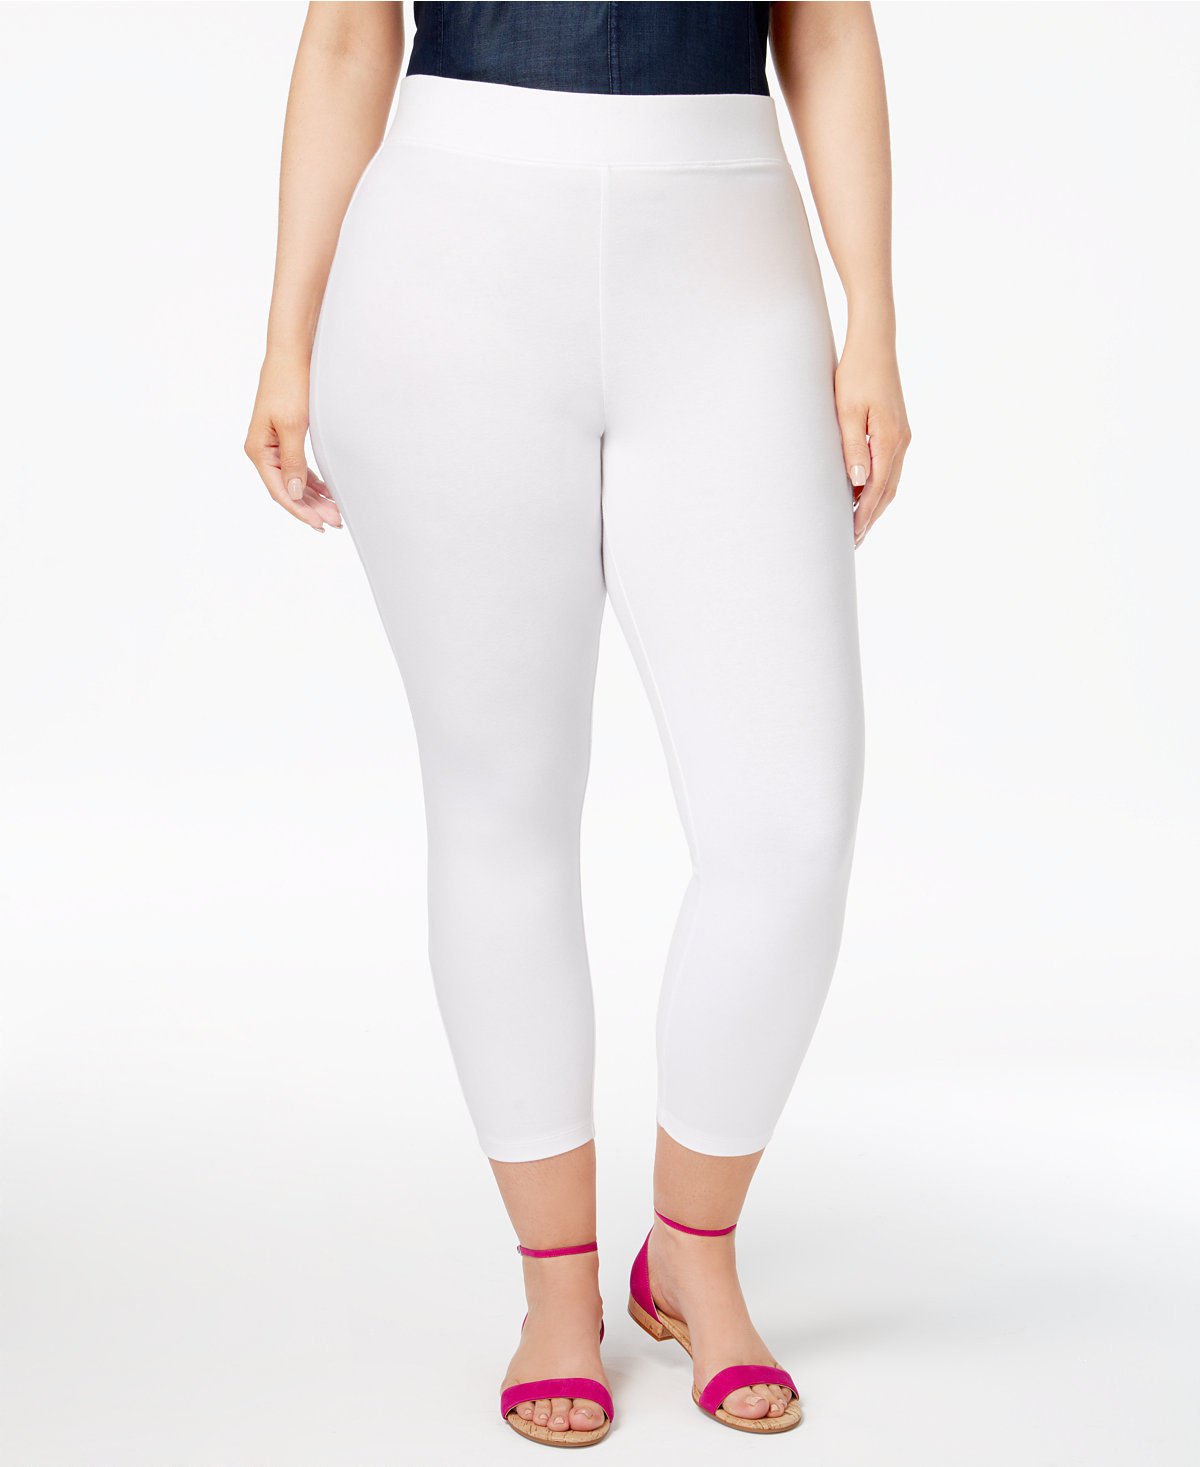 NEW YOUNG 3 Pack Plus Size Leggings with Pockets  